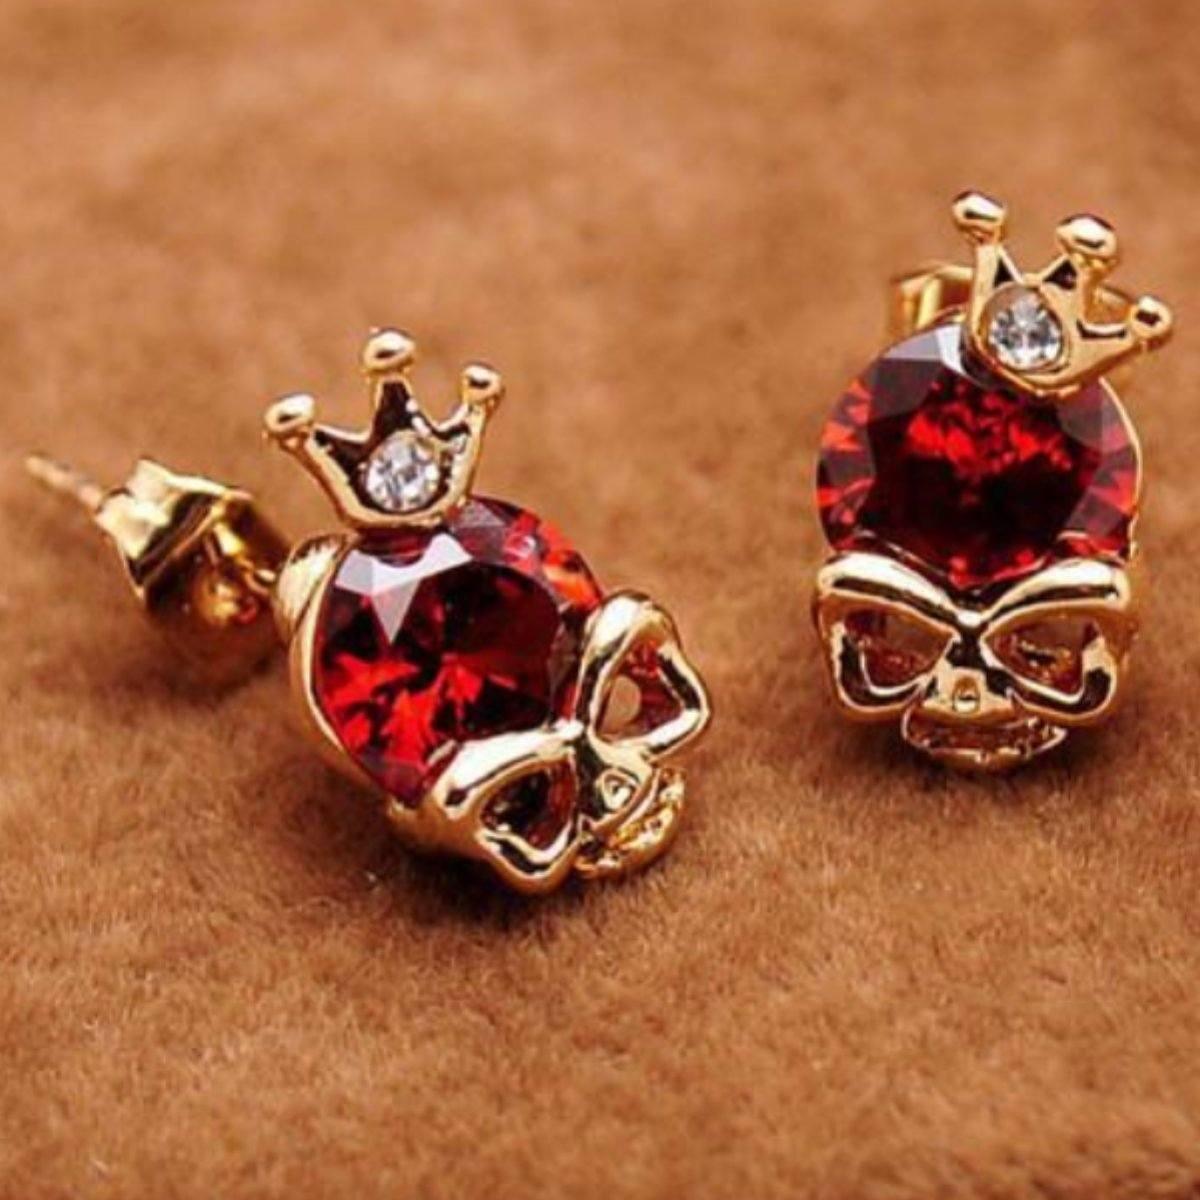 A pair of Woman's Gold Plated Skull Cubic Zircon stud earrings with red crystals.